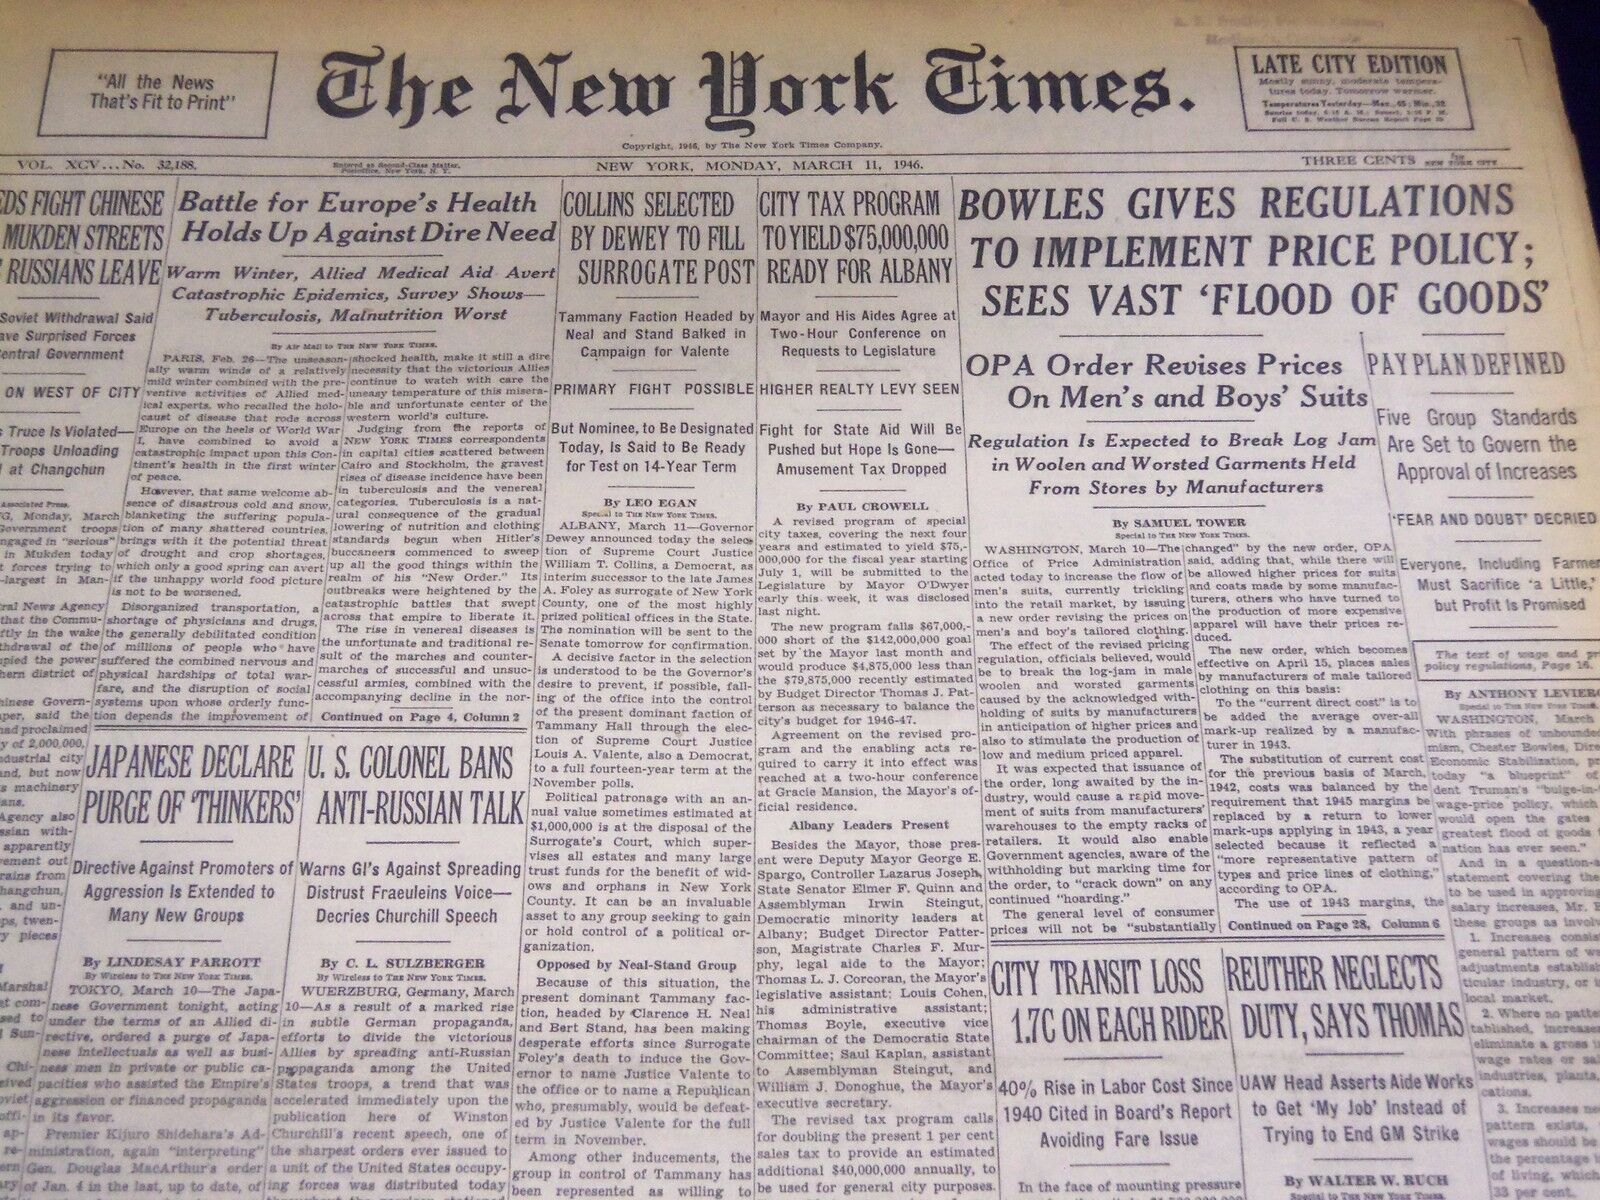 1946 MARCH 11 NEW YORK TIMES - BOWLES GIVES REGULATIONS - NT 3473